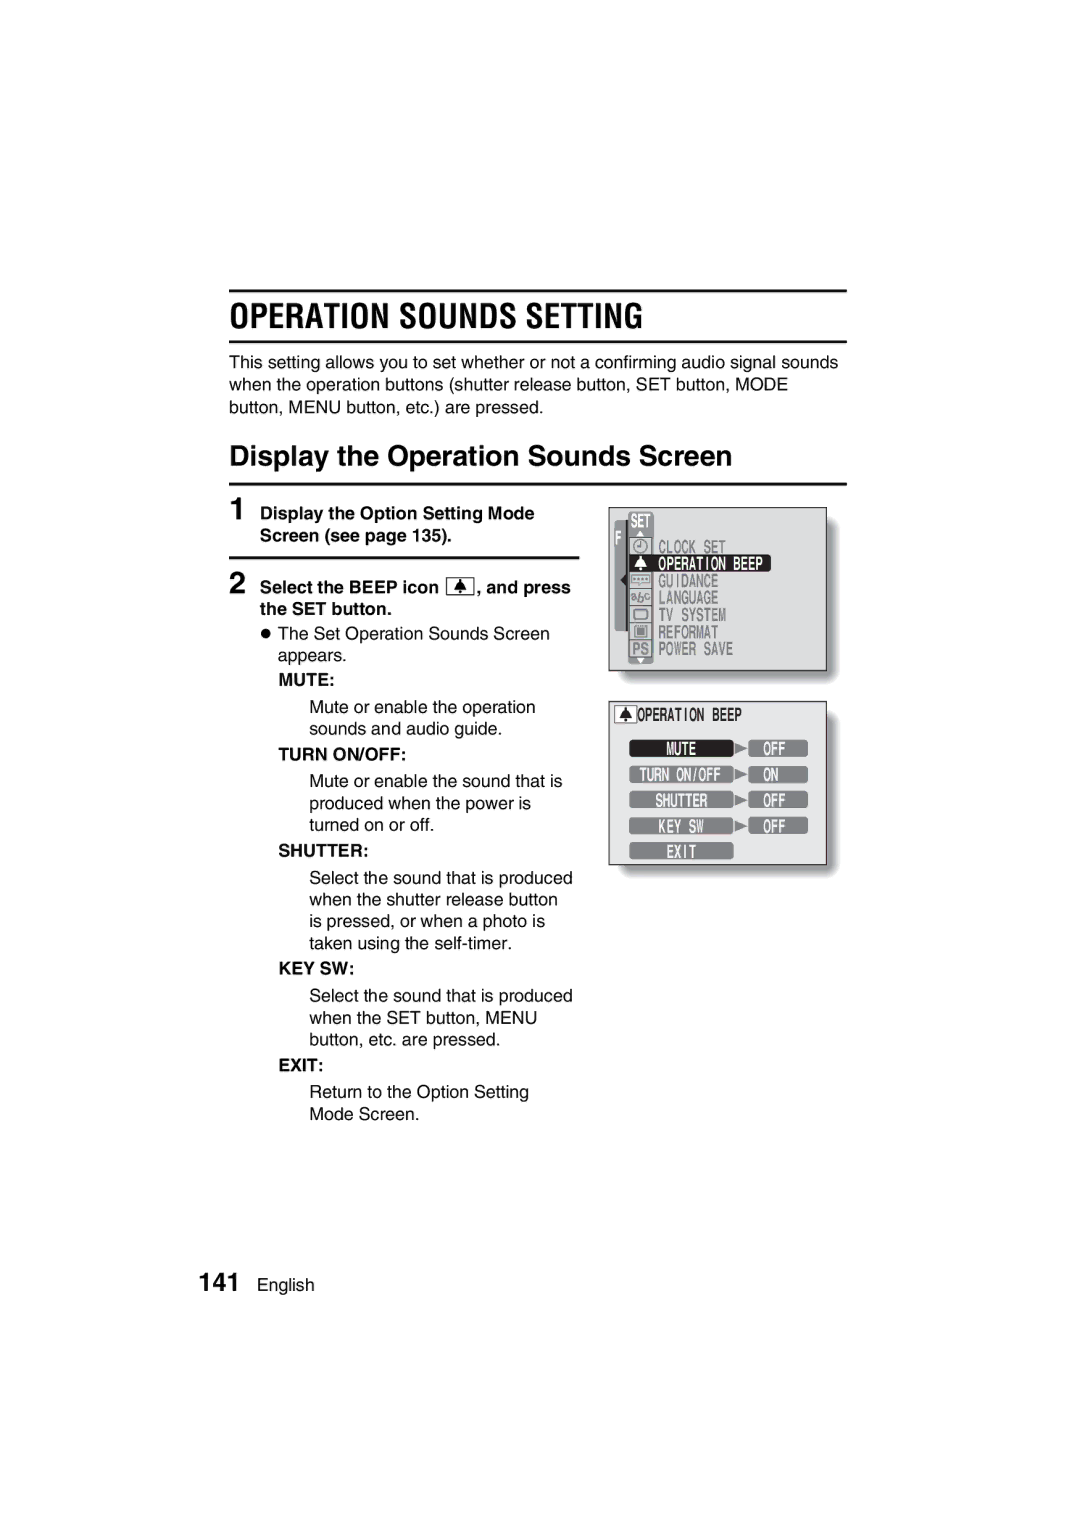 Sanyo VPC-J1EX instruction manual Operation Sounds Setting, Display the Operation Sounds Screen, Key Sw 